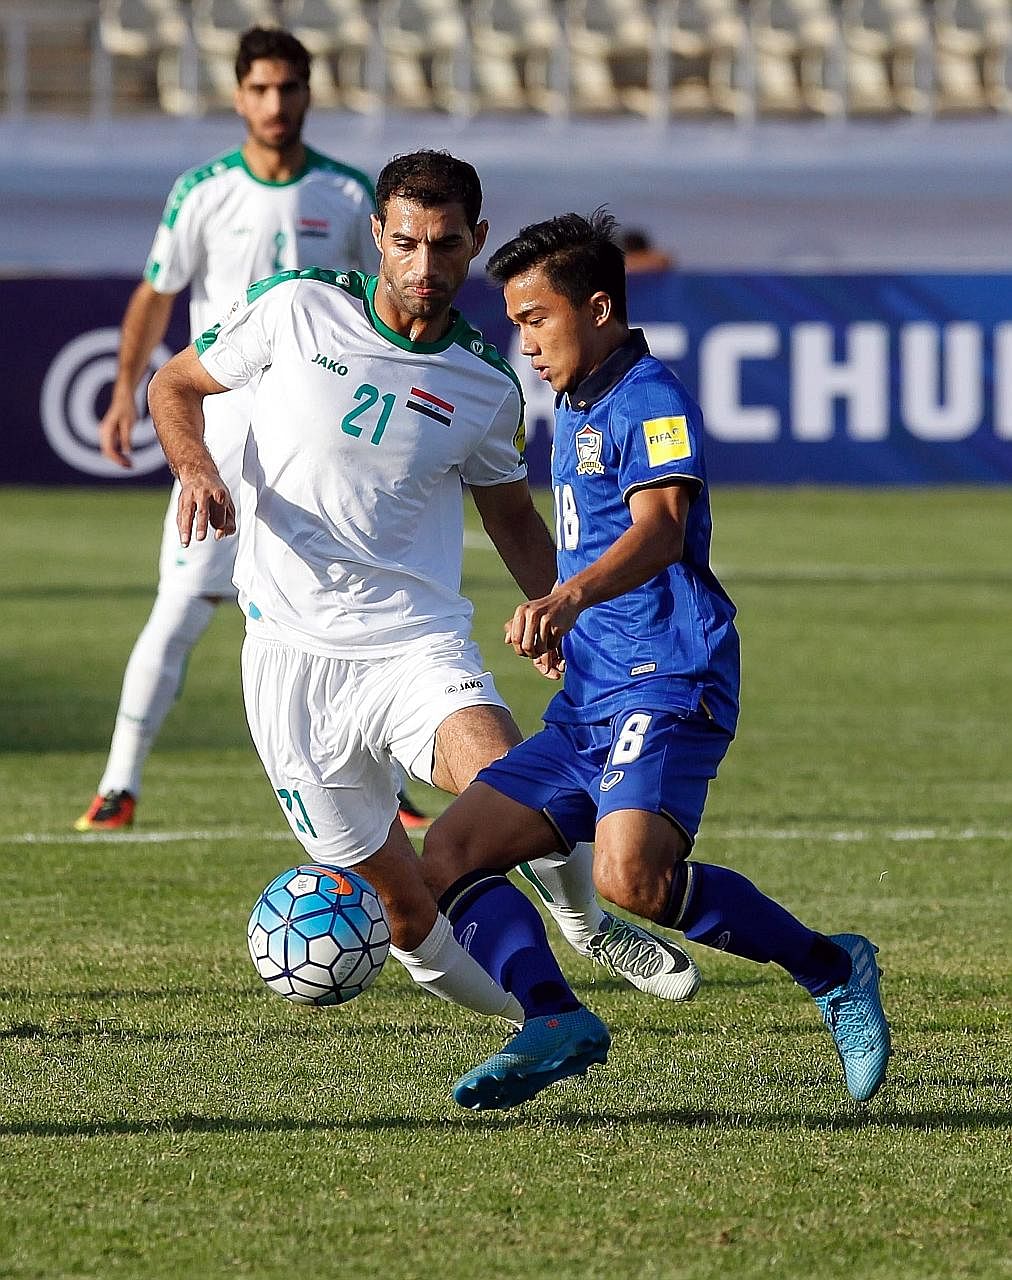 Iraq's Saad Abdulameer closing in on Thailand's Chanathip Songkrasin during their World Cup qualifier in Teheran last Tuesday. Thailand have lost all four games so far and their chances of making the 2018 Finals in Russia are slim.